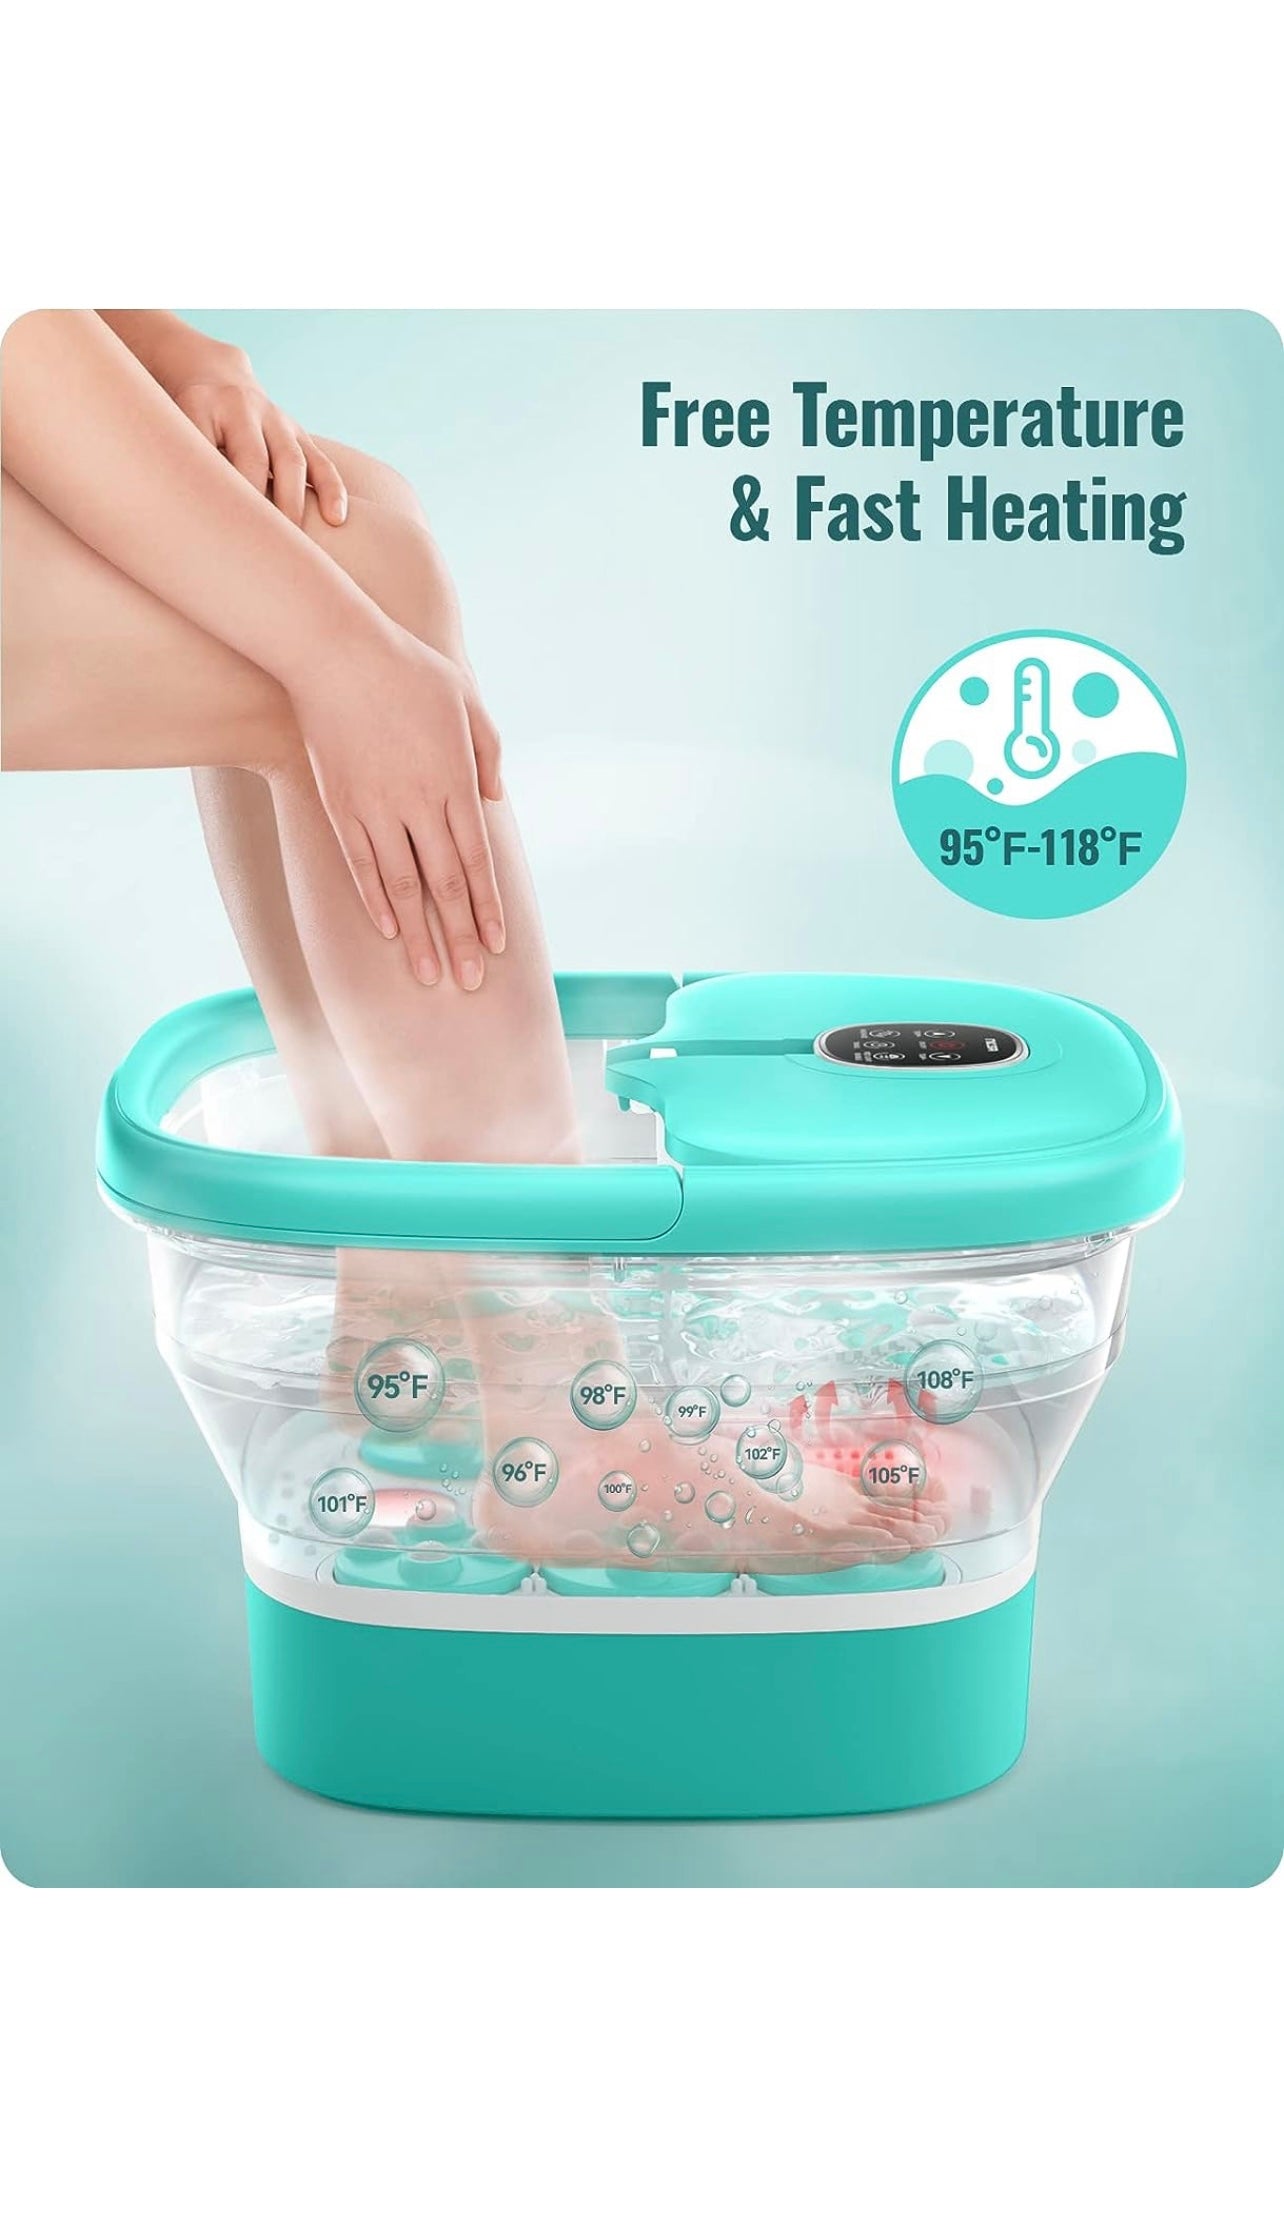 Niksa Collapsible Foot Spa Bath Massager with Heat, Bubbles